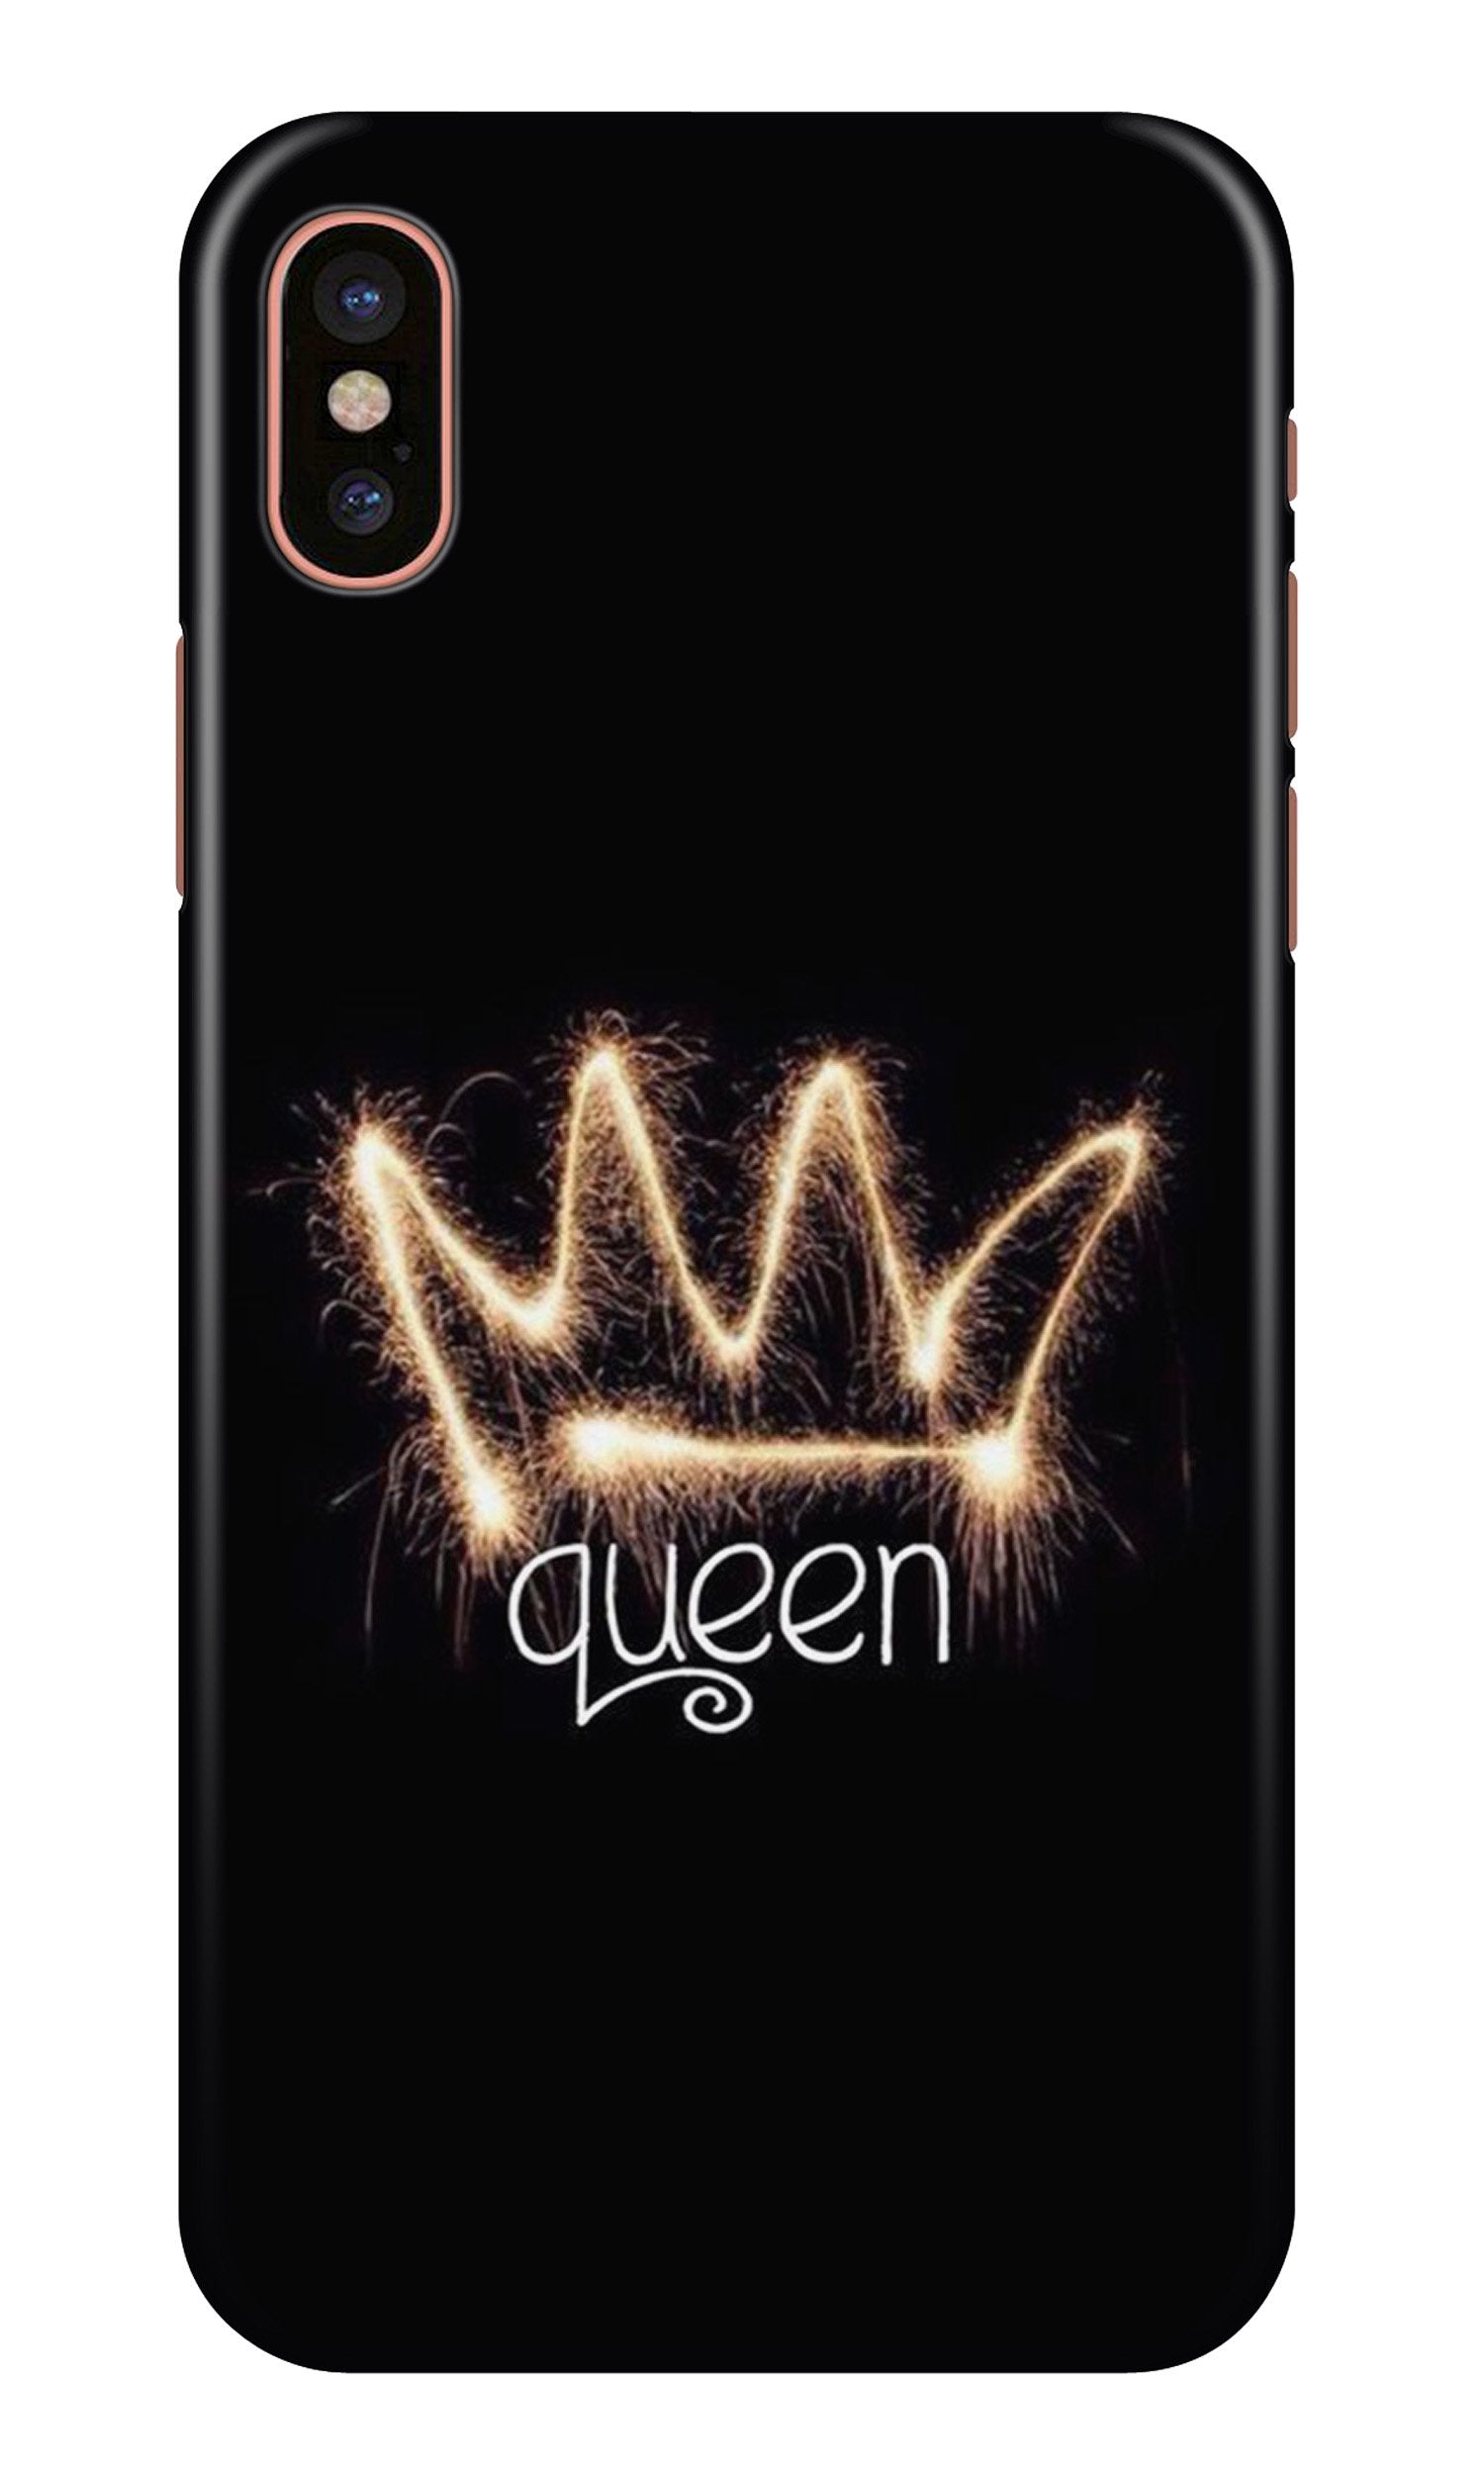 Queen Case for iPhone Xs Max (Design No. 270)